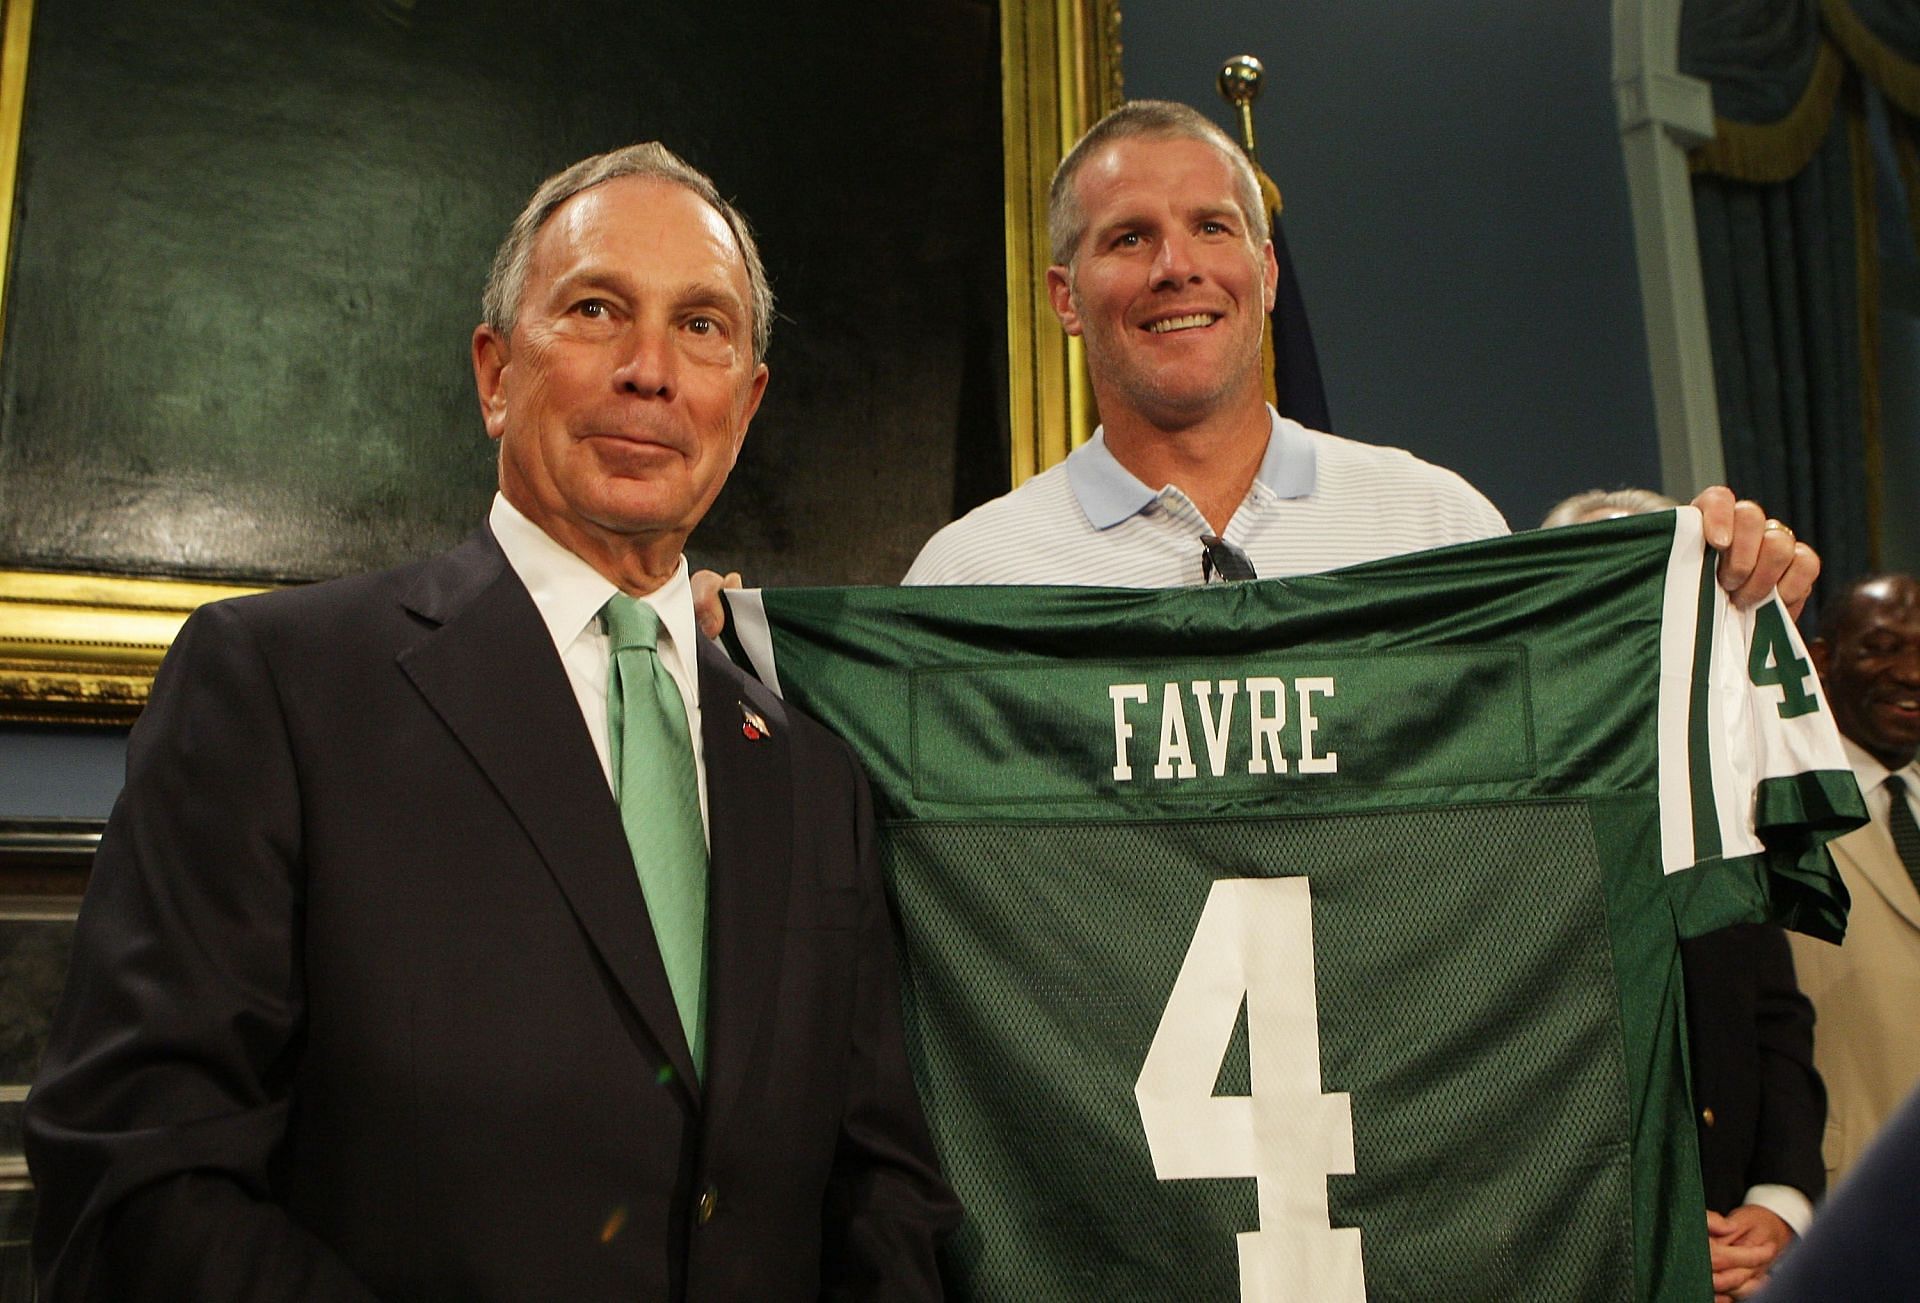 Before Rodgers, Brett Favre also left Green Bay and made his way to the Jets.